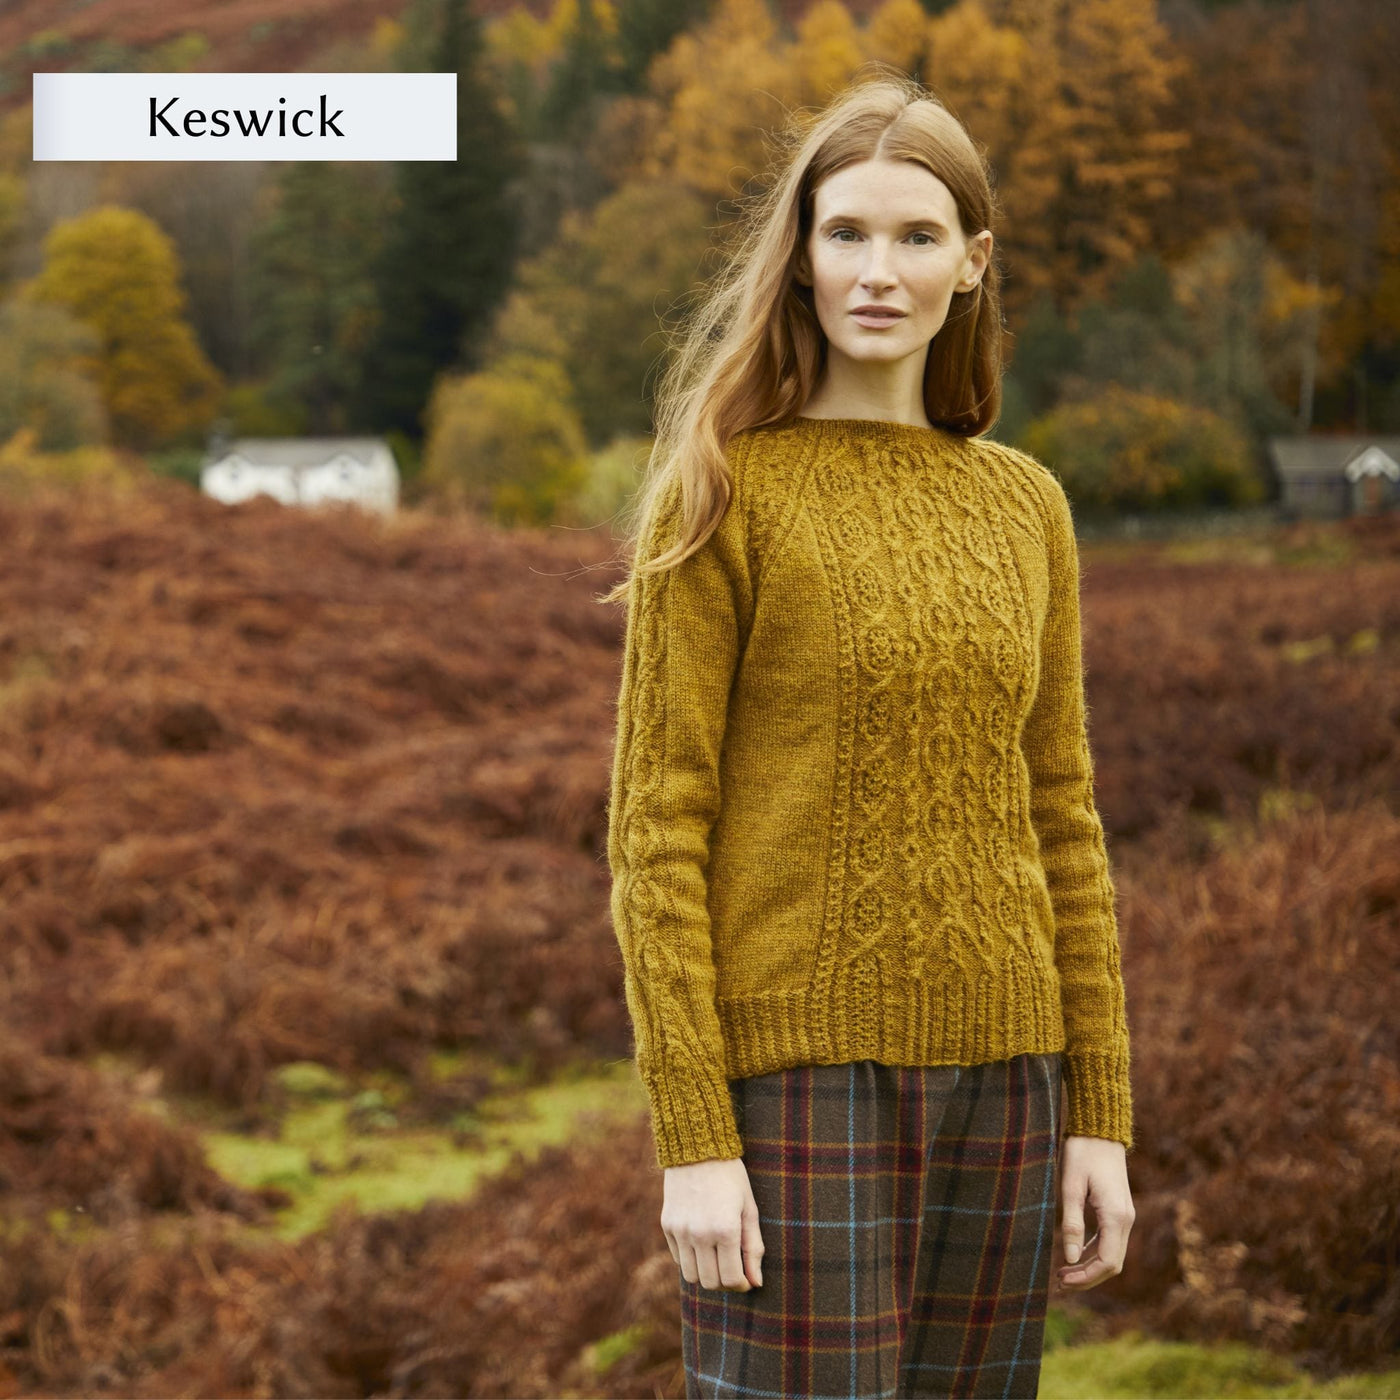 Female model wearing textured sweater design, Keswick, from Westmorland book by Marie Wallin. Sweater is knit in a golden green color.